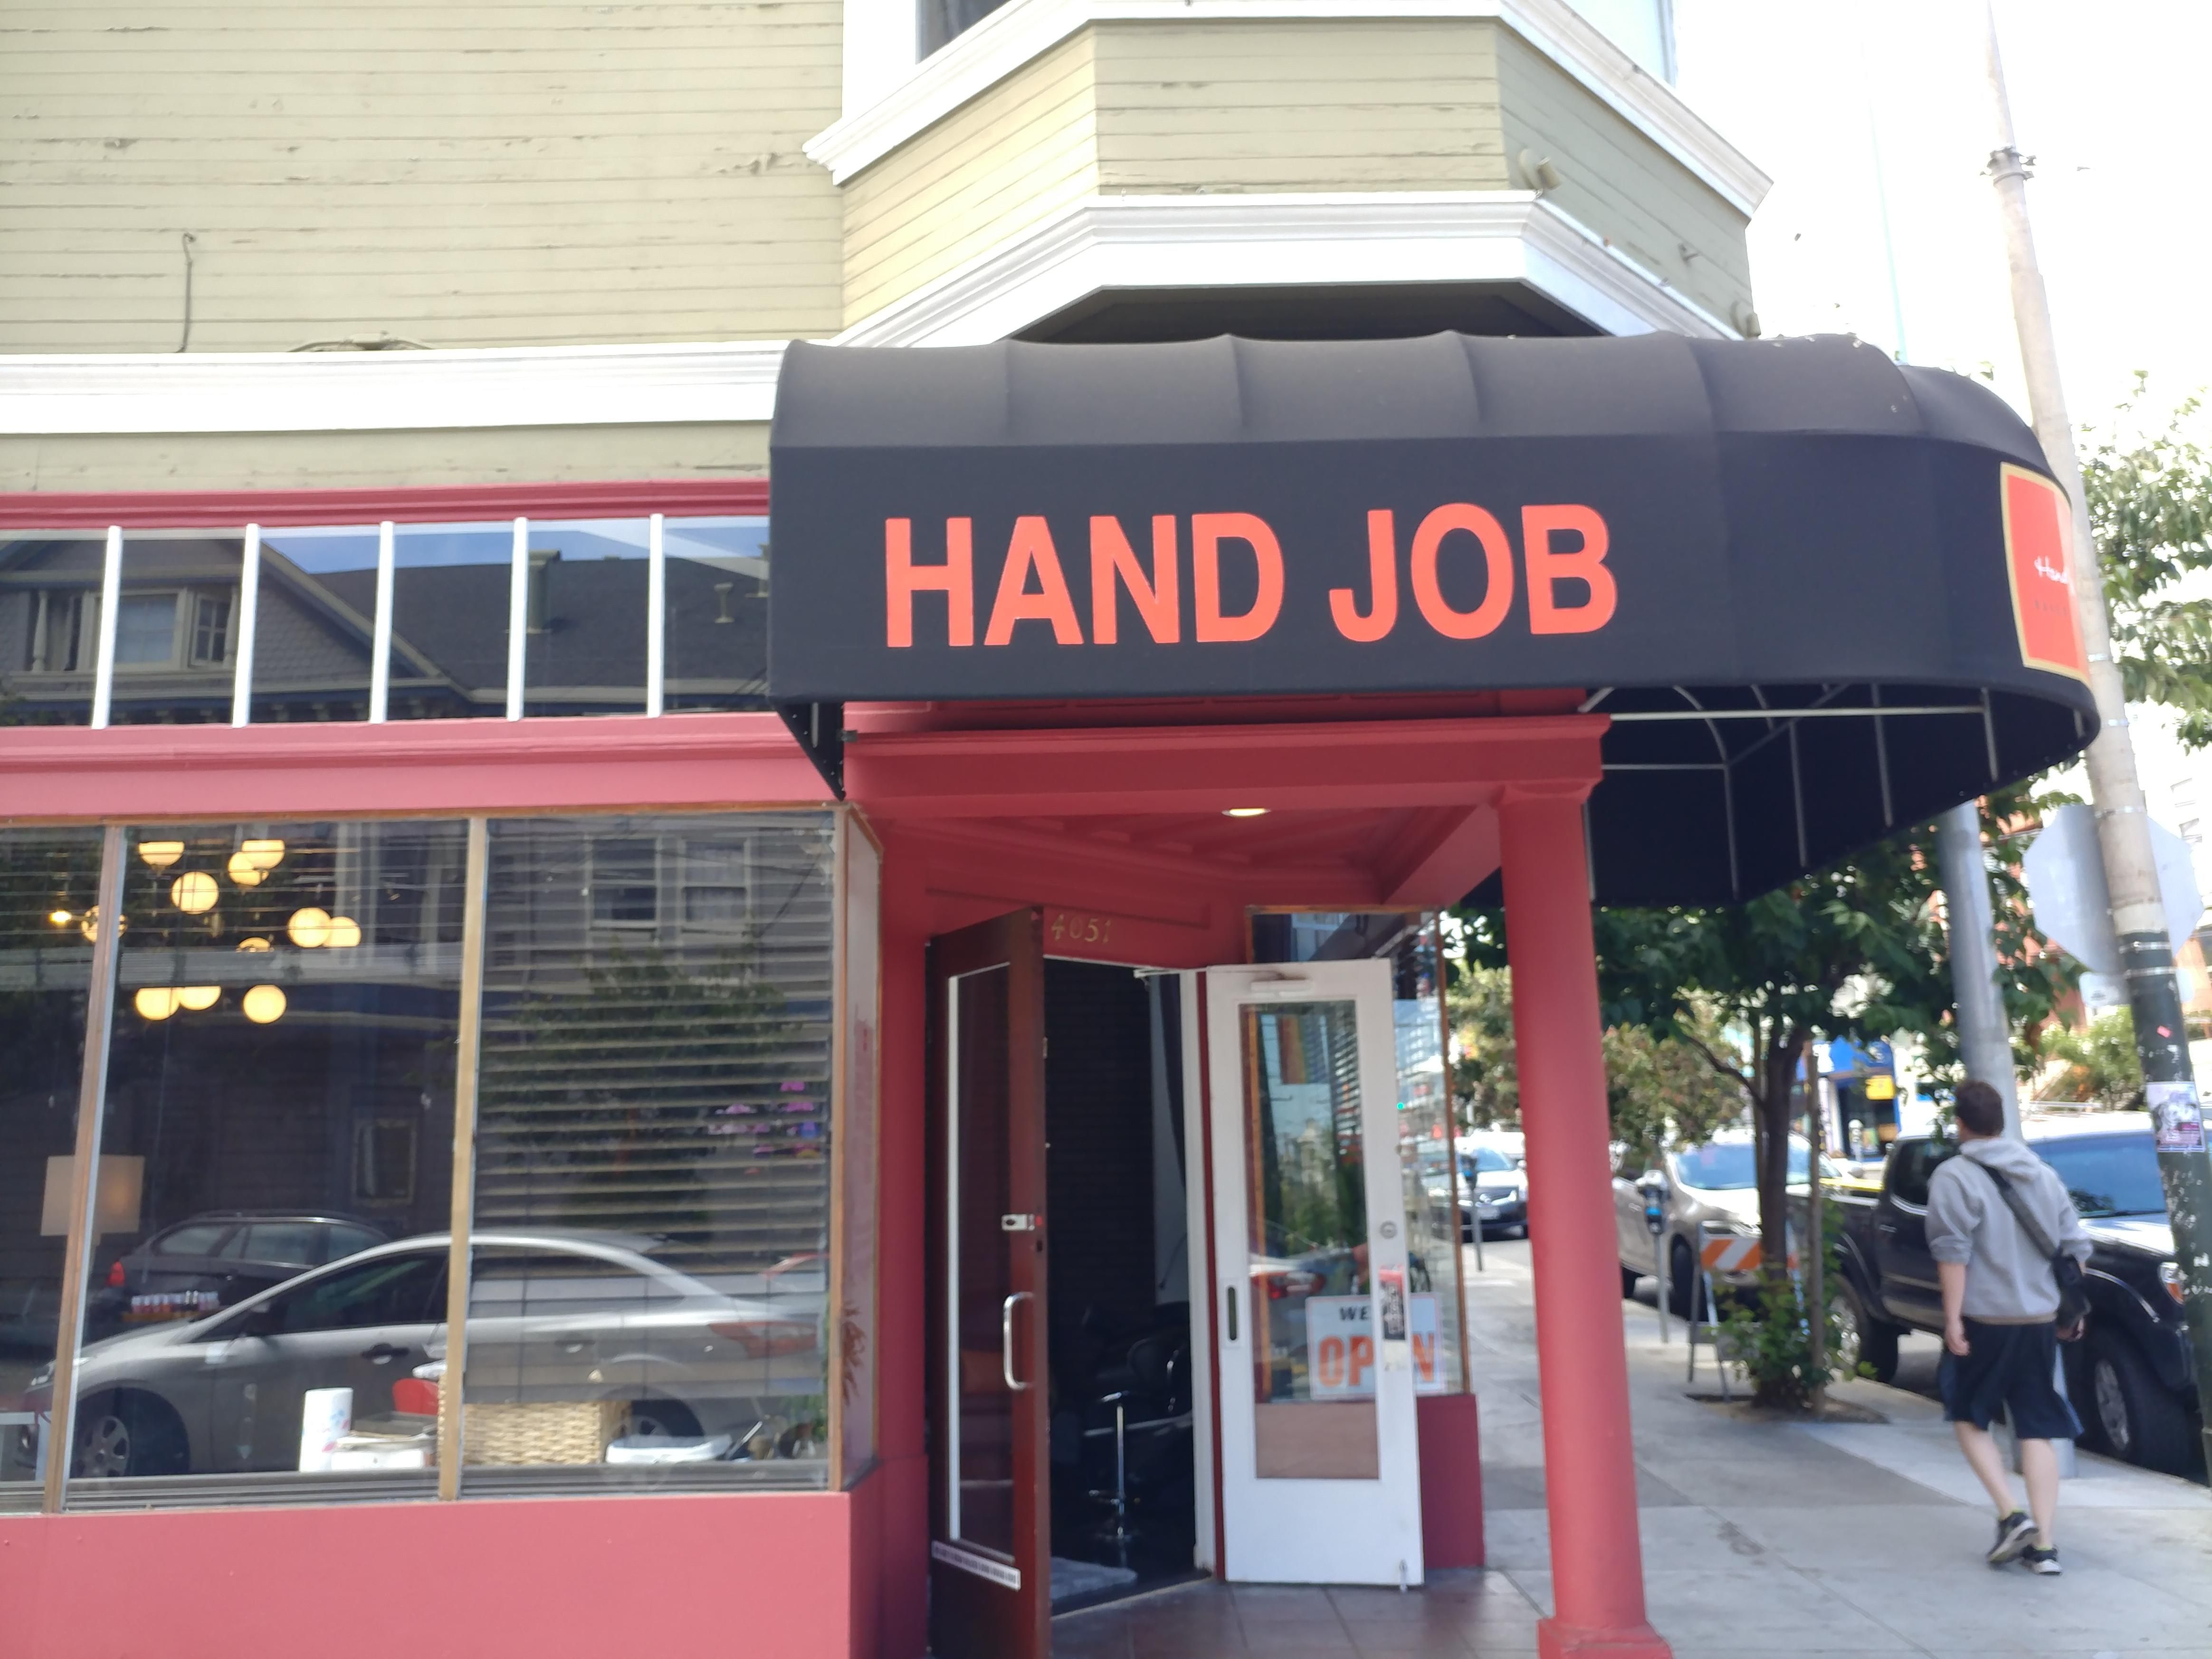 This is a real nail salon in SF